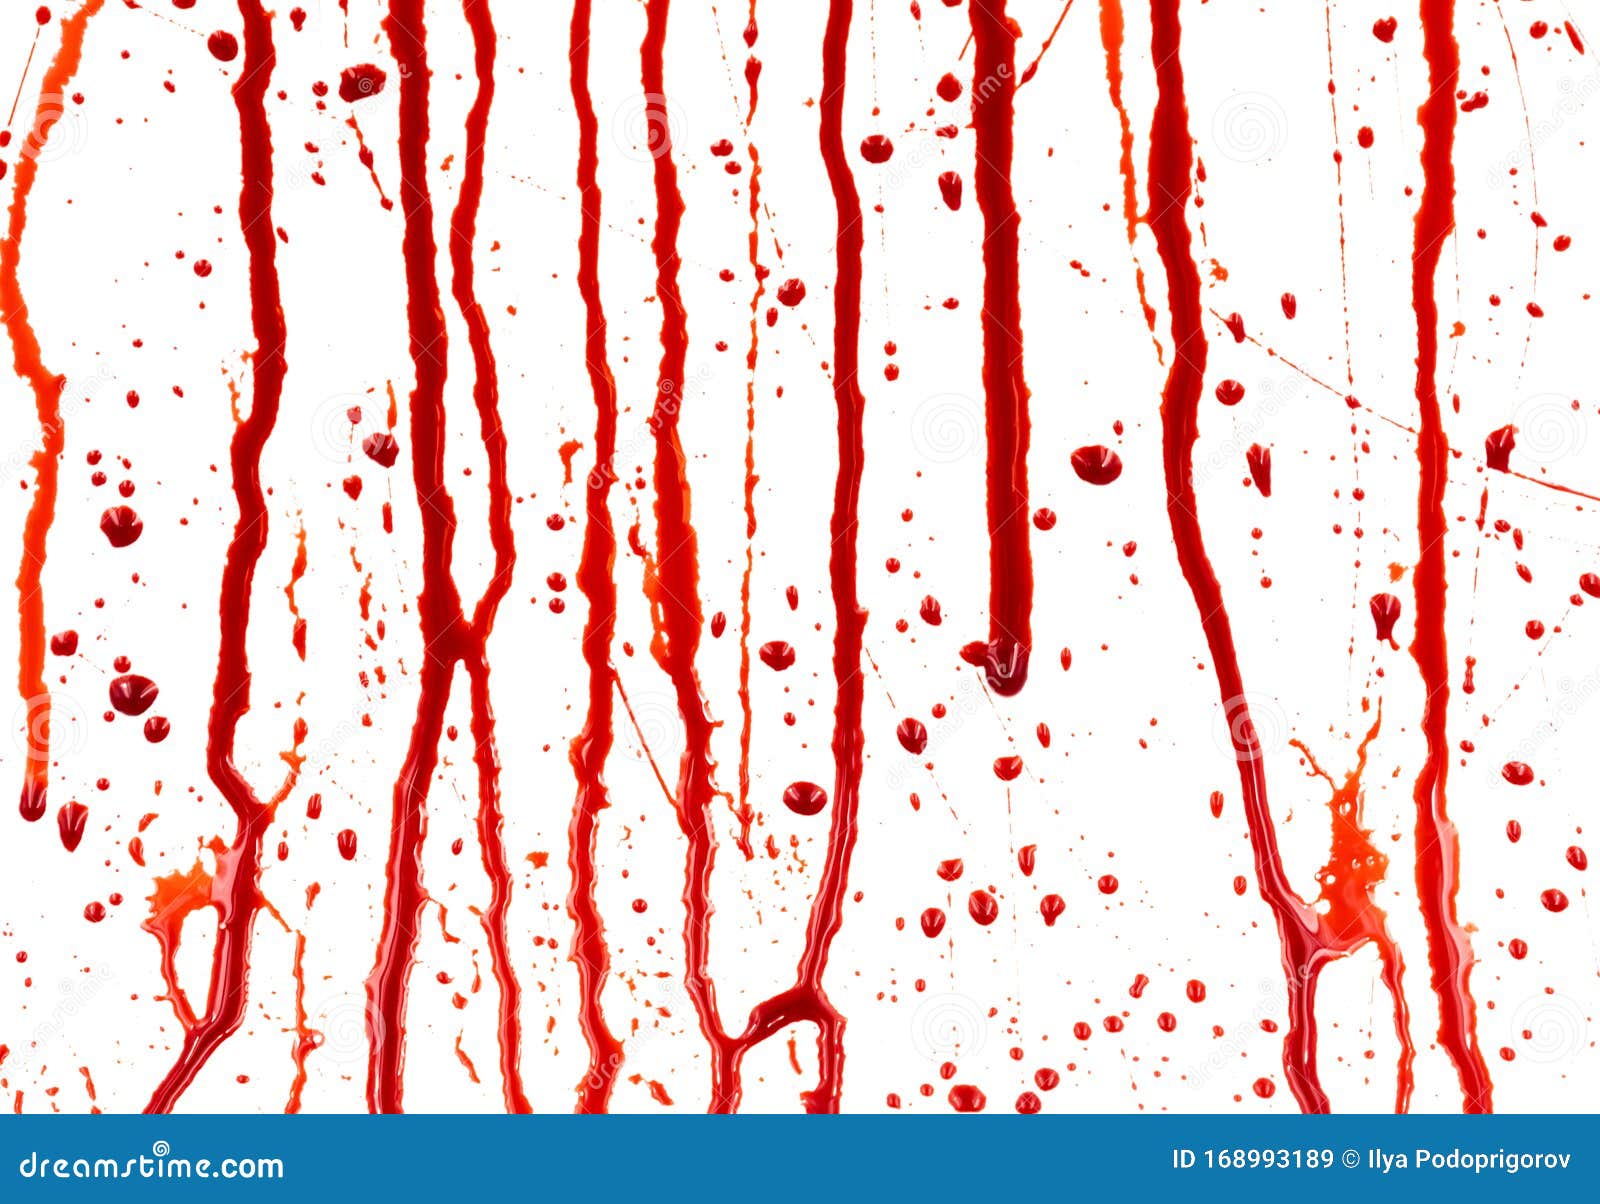 Dripping Blood Isolated on White Background. Flowing Red Blood Splashes,  Drops and Trail Stock Image - Image of bloody, liquid: 168993189